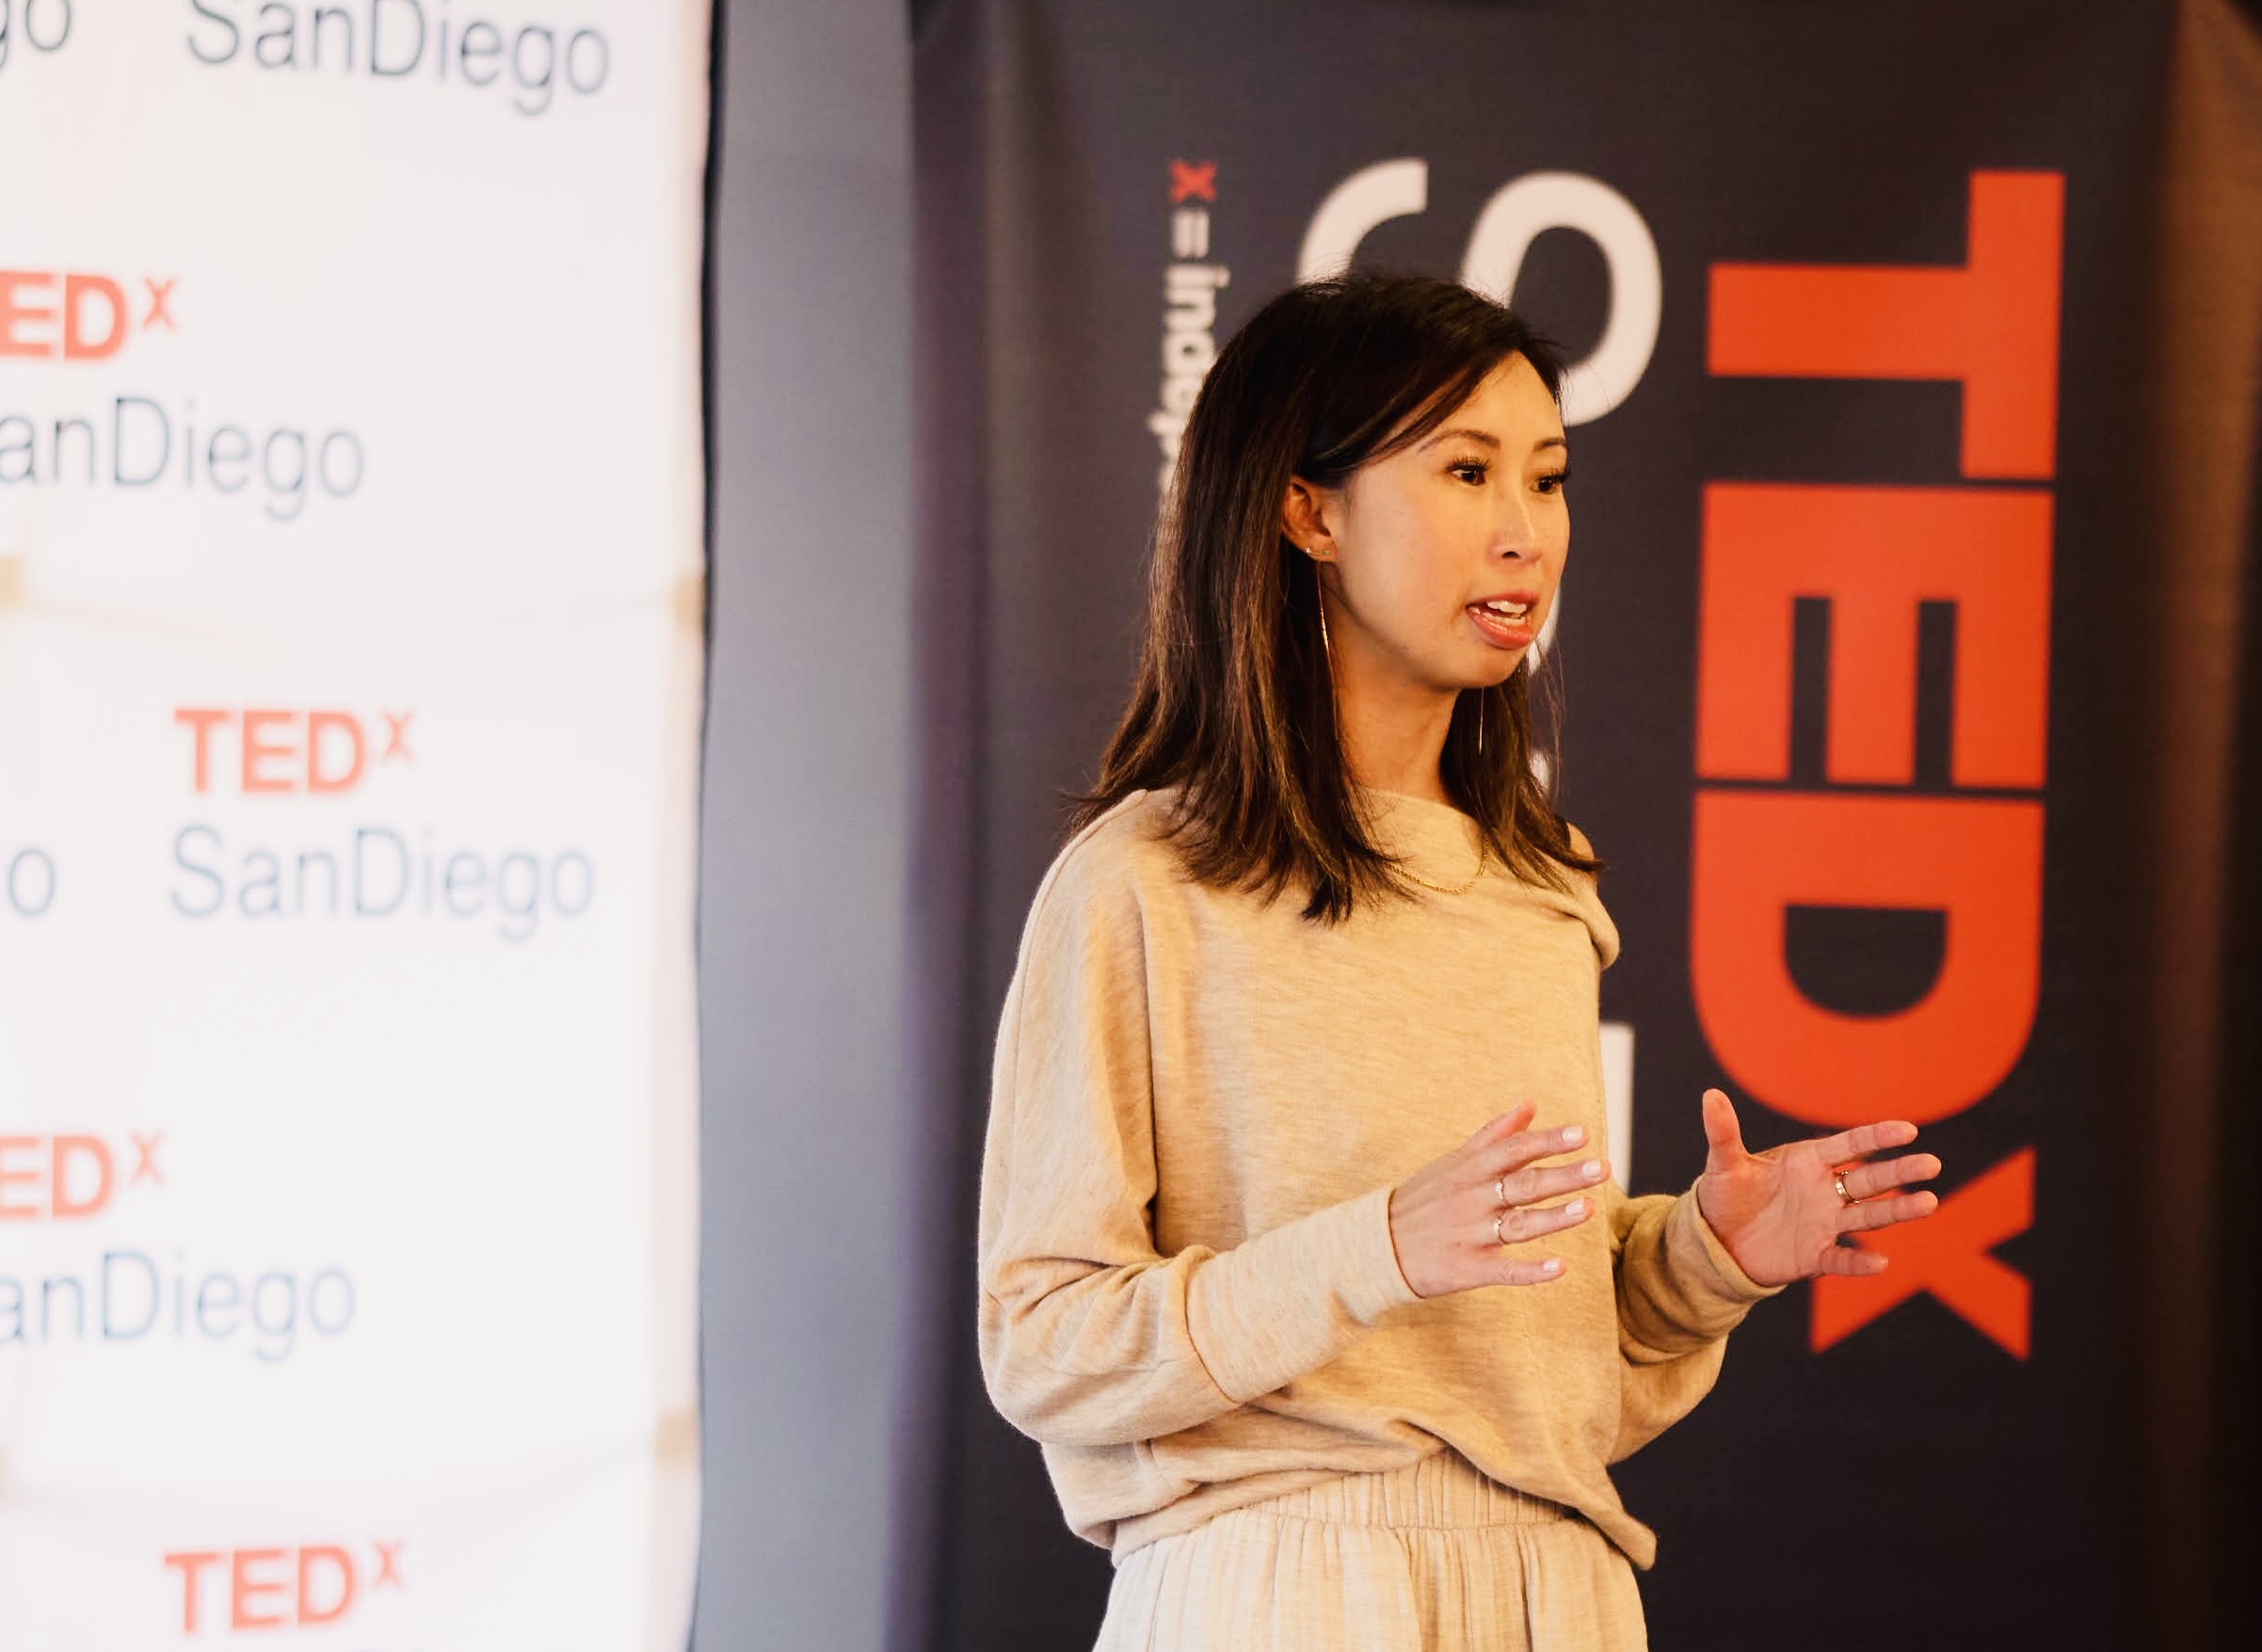 Image of Dr. Jillian Wiggins wearing a beige sweater and beige pants presenting in front of a TEDx background.